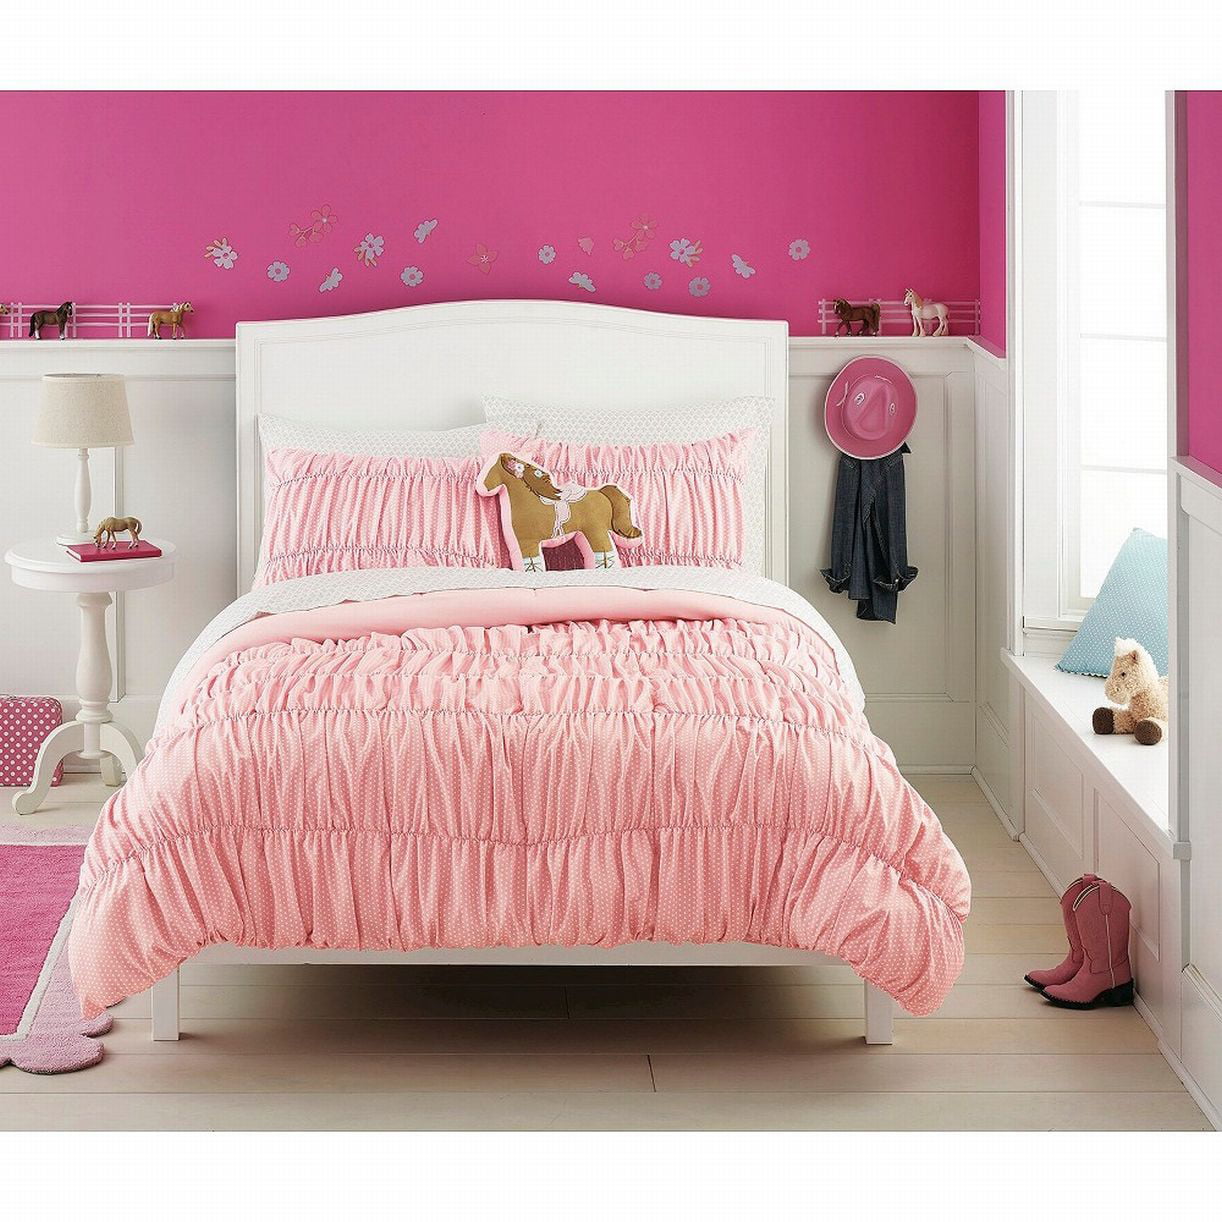 Circo Twin Bed In A Bag Pink Banded, Circo Twin Bedding